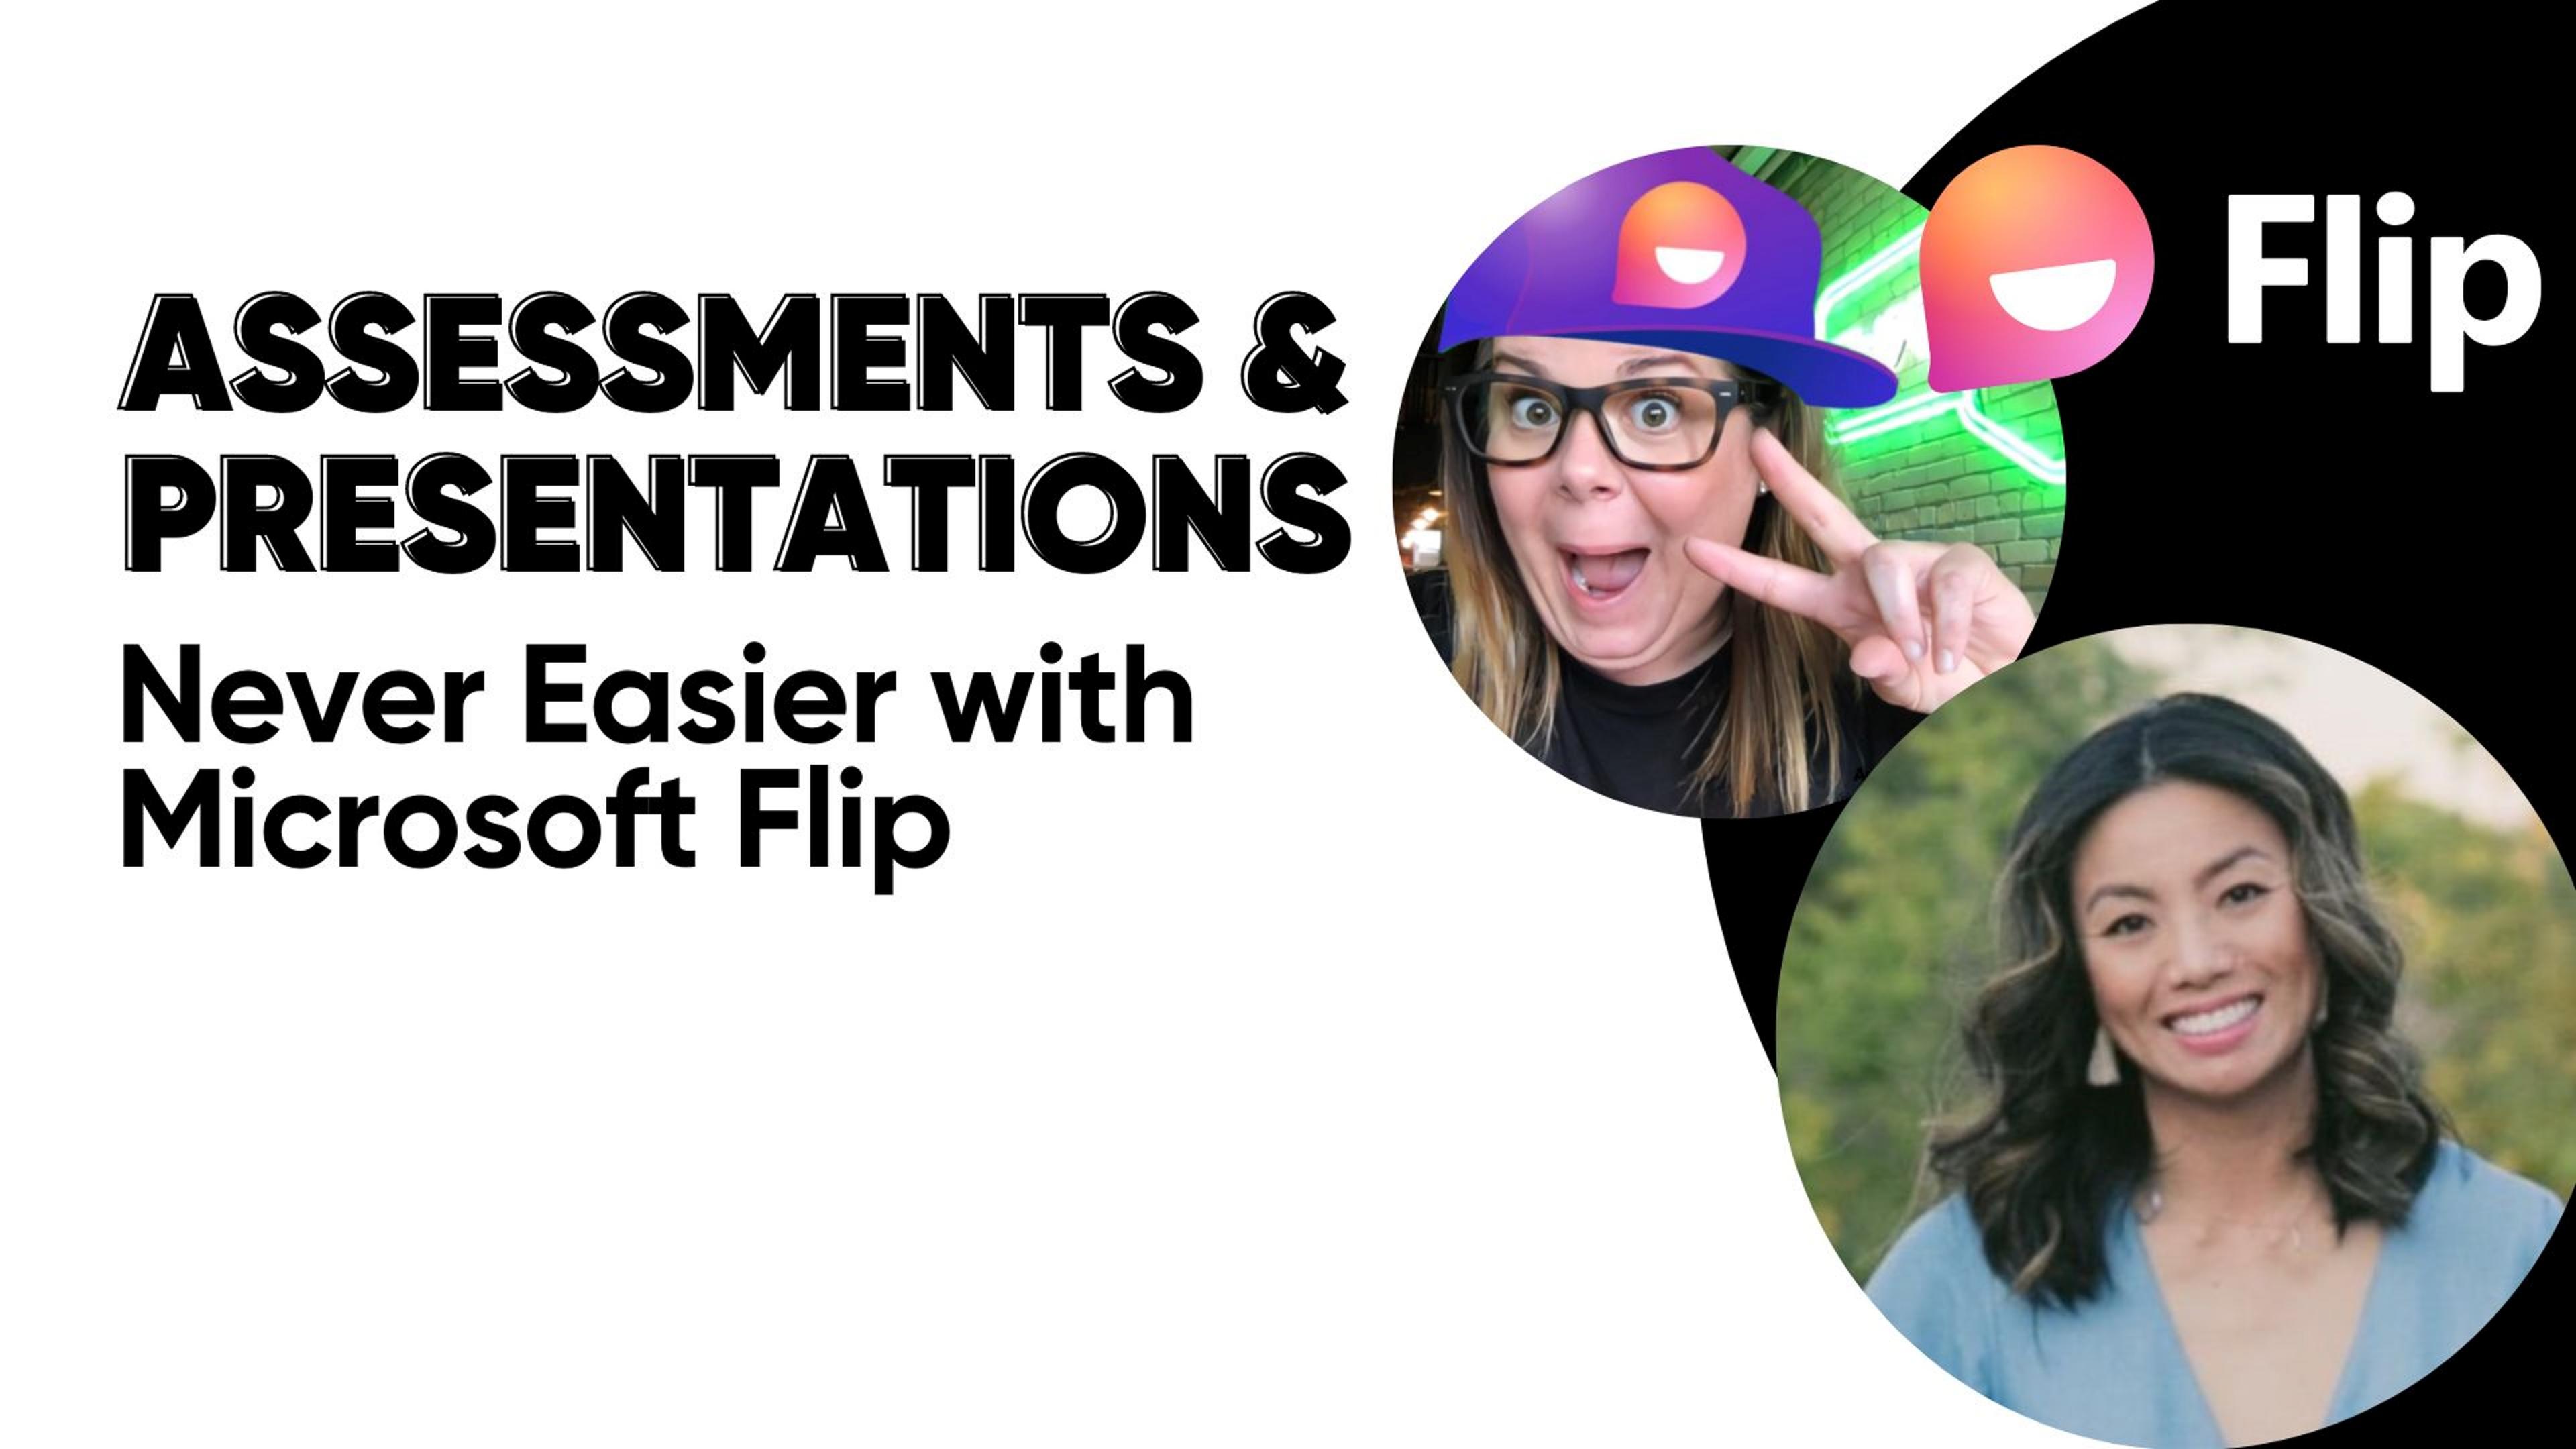 Assessments & Presentations, Never Easier with Microsoft Flip